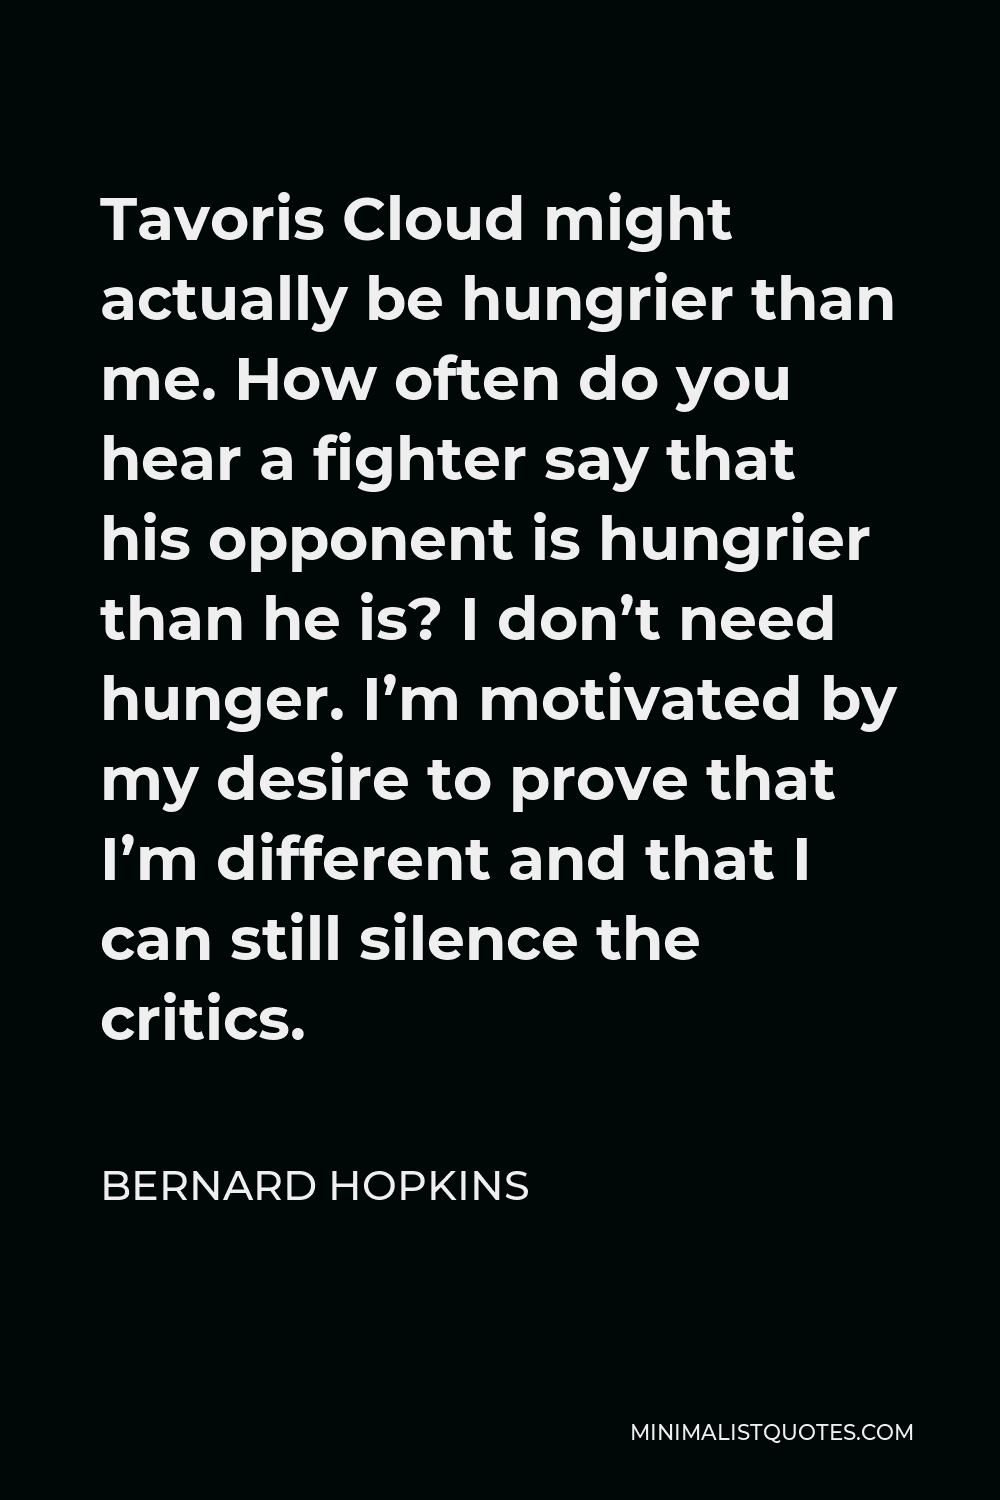 Bernard Hopkins Quote - Tavoris Cloud might actually be hungrier than me. How often do you hear a fighter say that his opponent is hungrier than he is? I don’t need hunger. I’m motivated by my desire to prove that I’m different and that I can still silence the critics.